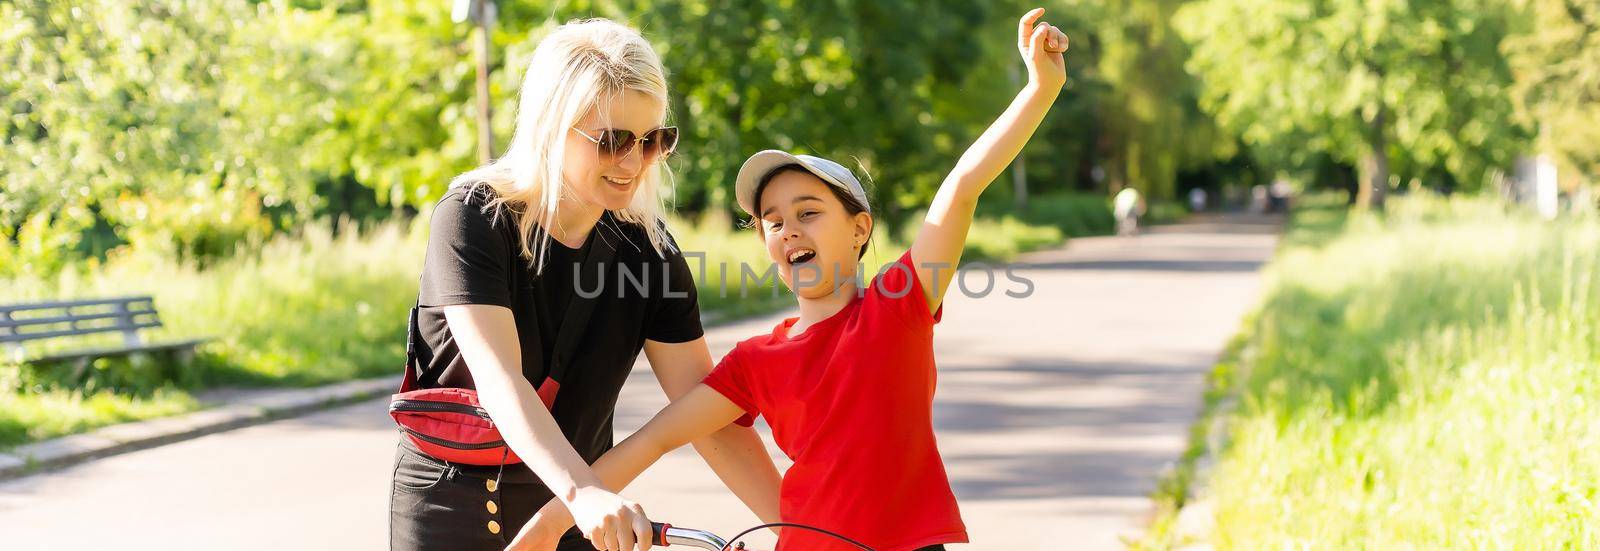 Beautiful and happy young mother teaching her daughter to ride a bicycle. Both smiling, summer park in background